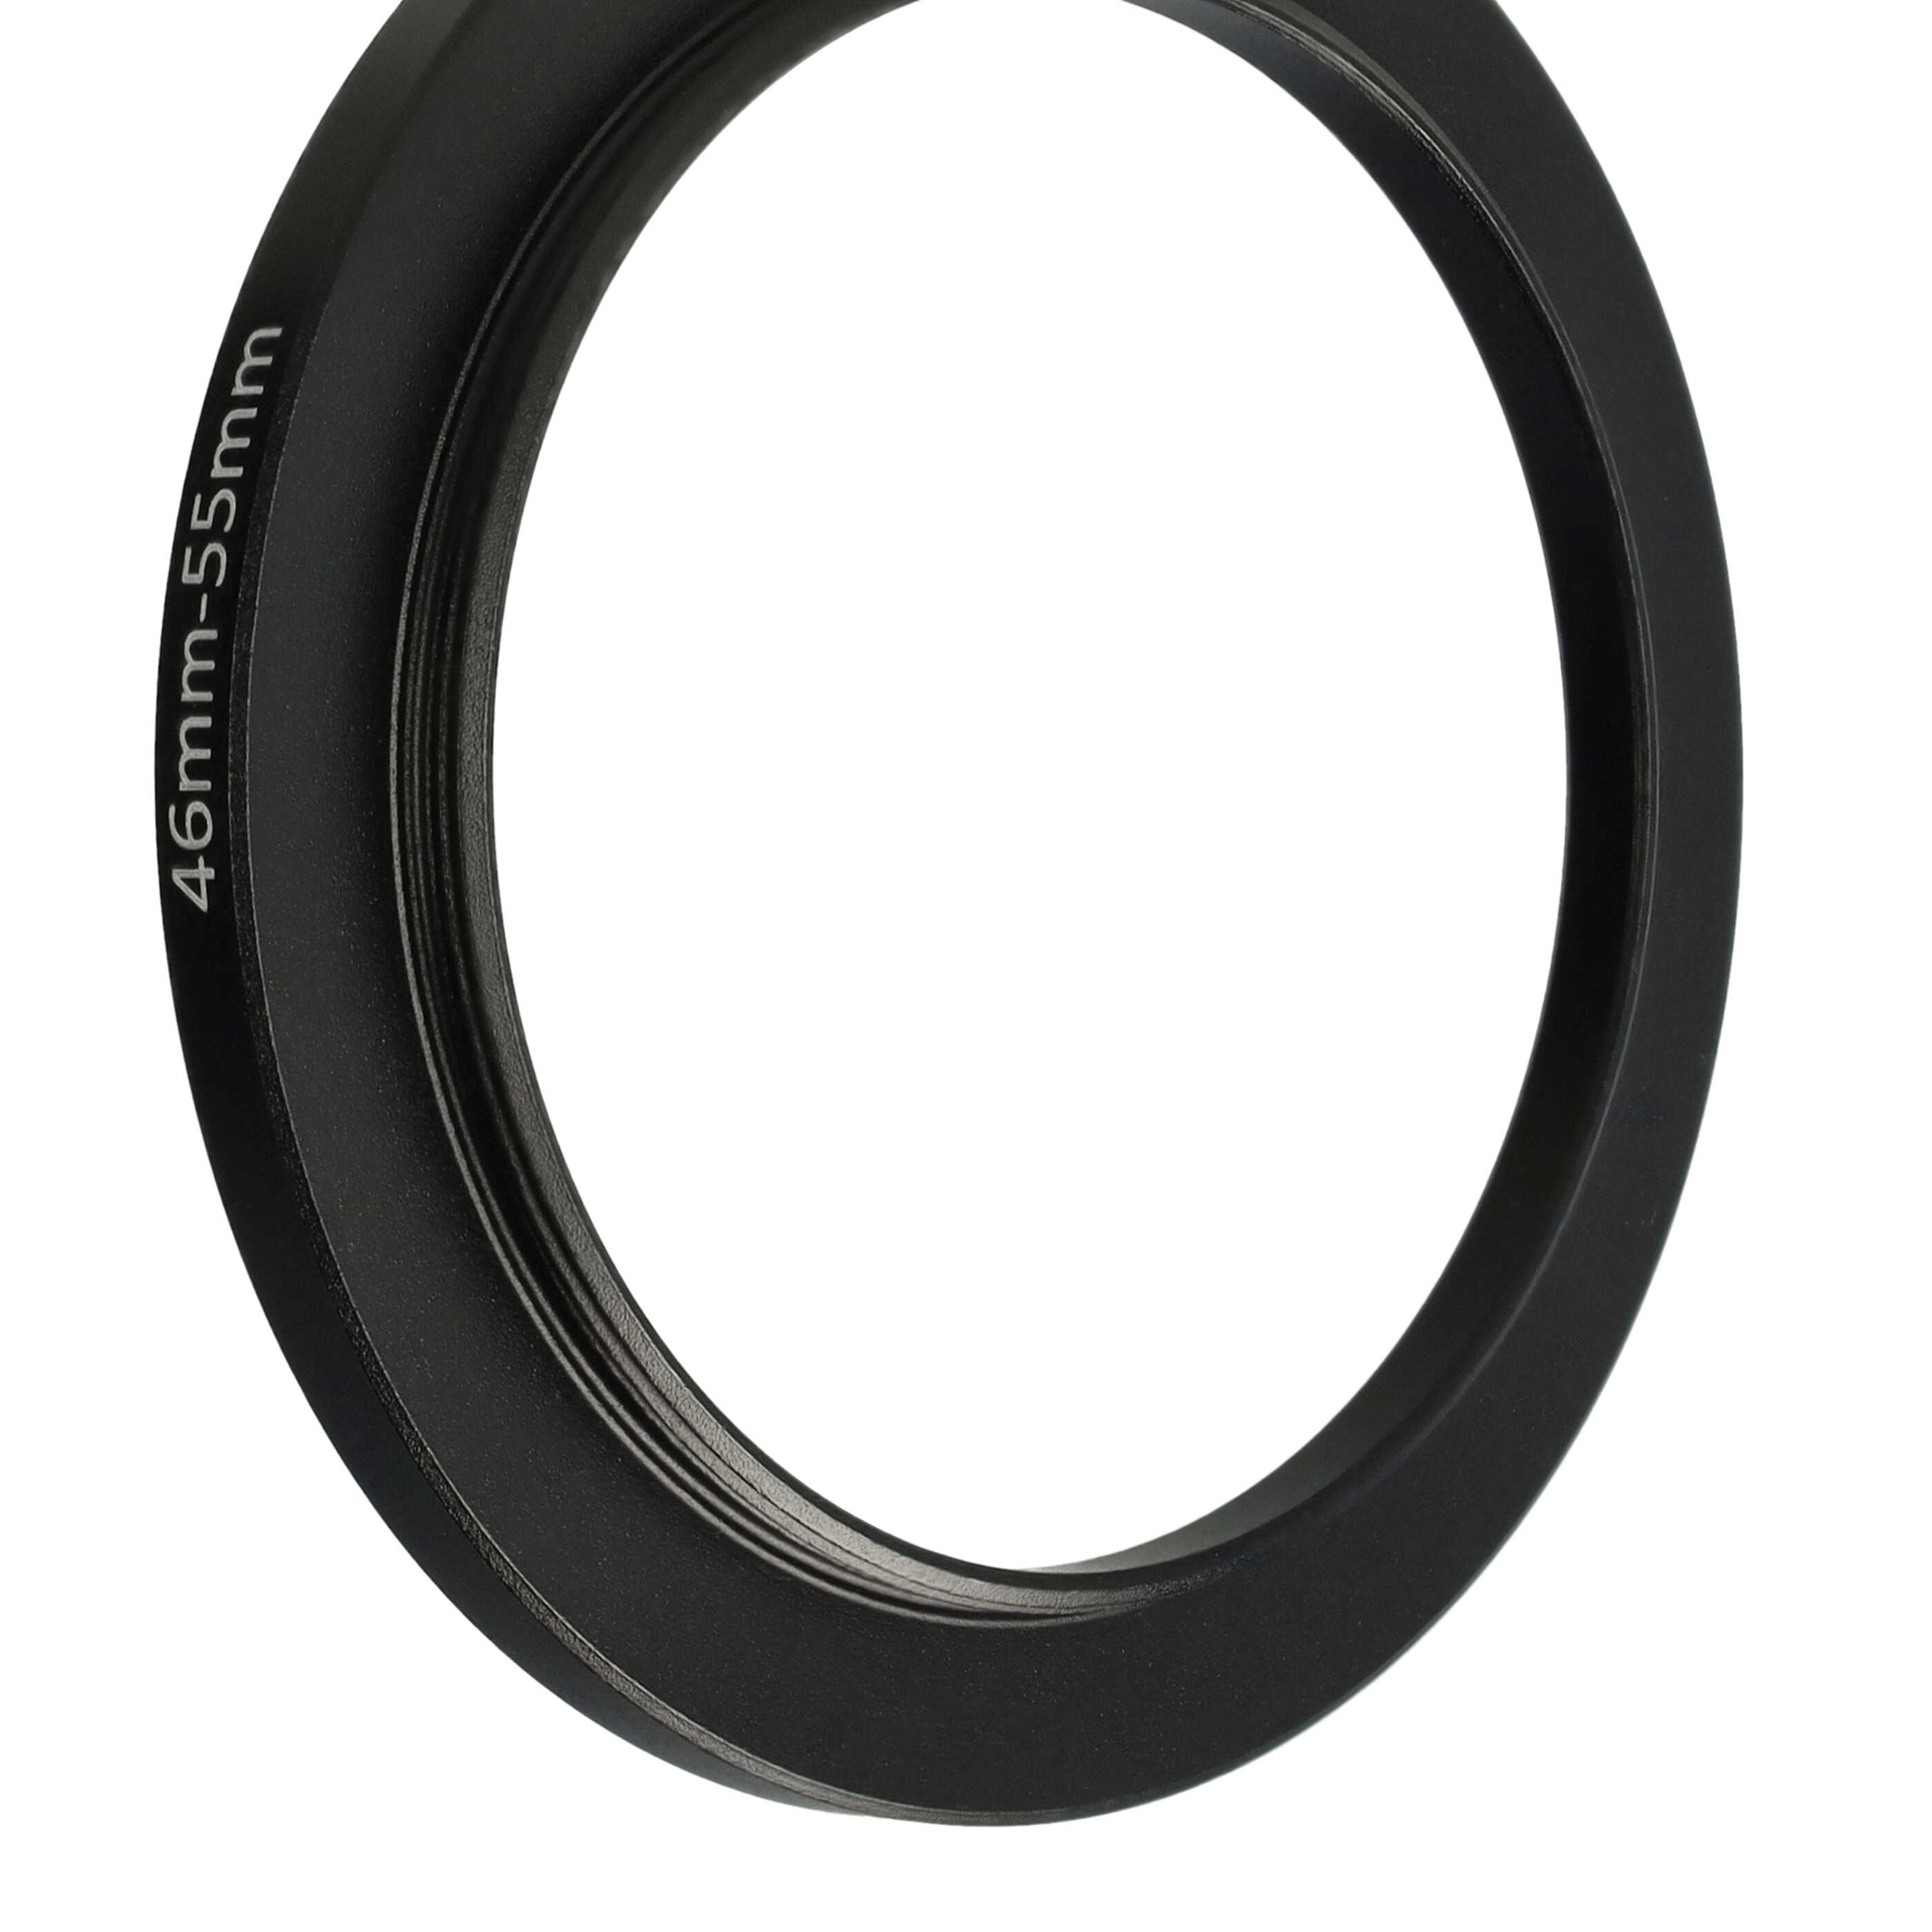 Step-Up Ring Adapter of 46 mm to 55 mmfor various Camera Lens - Filter Adapter